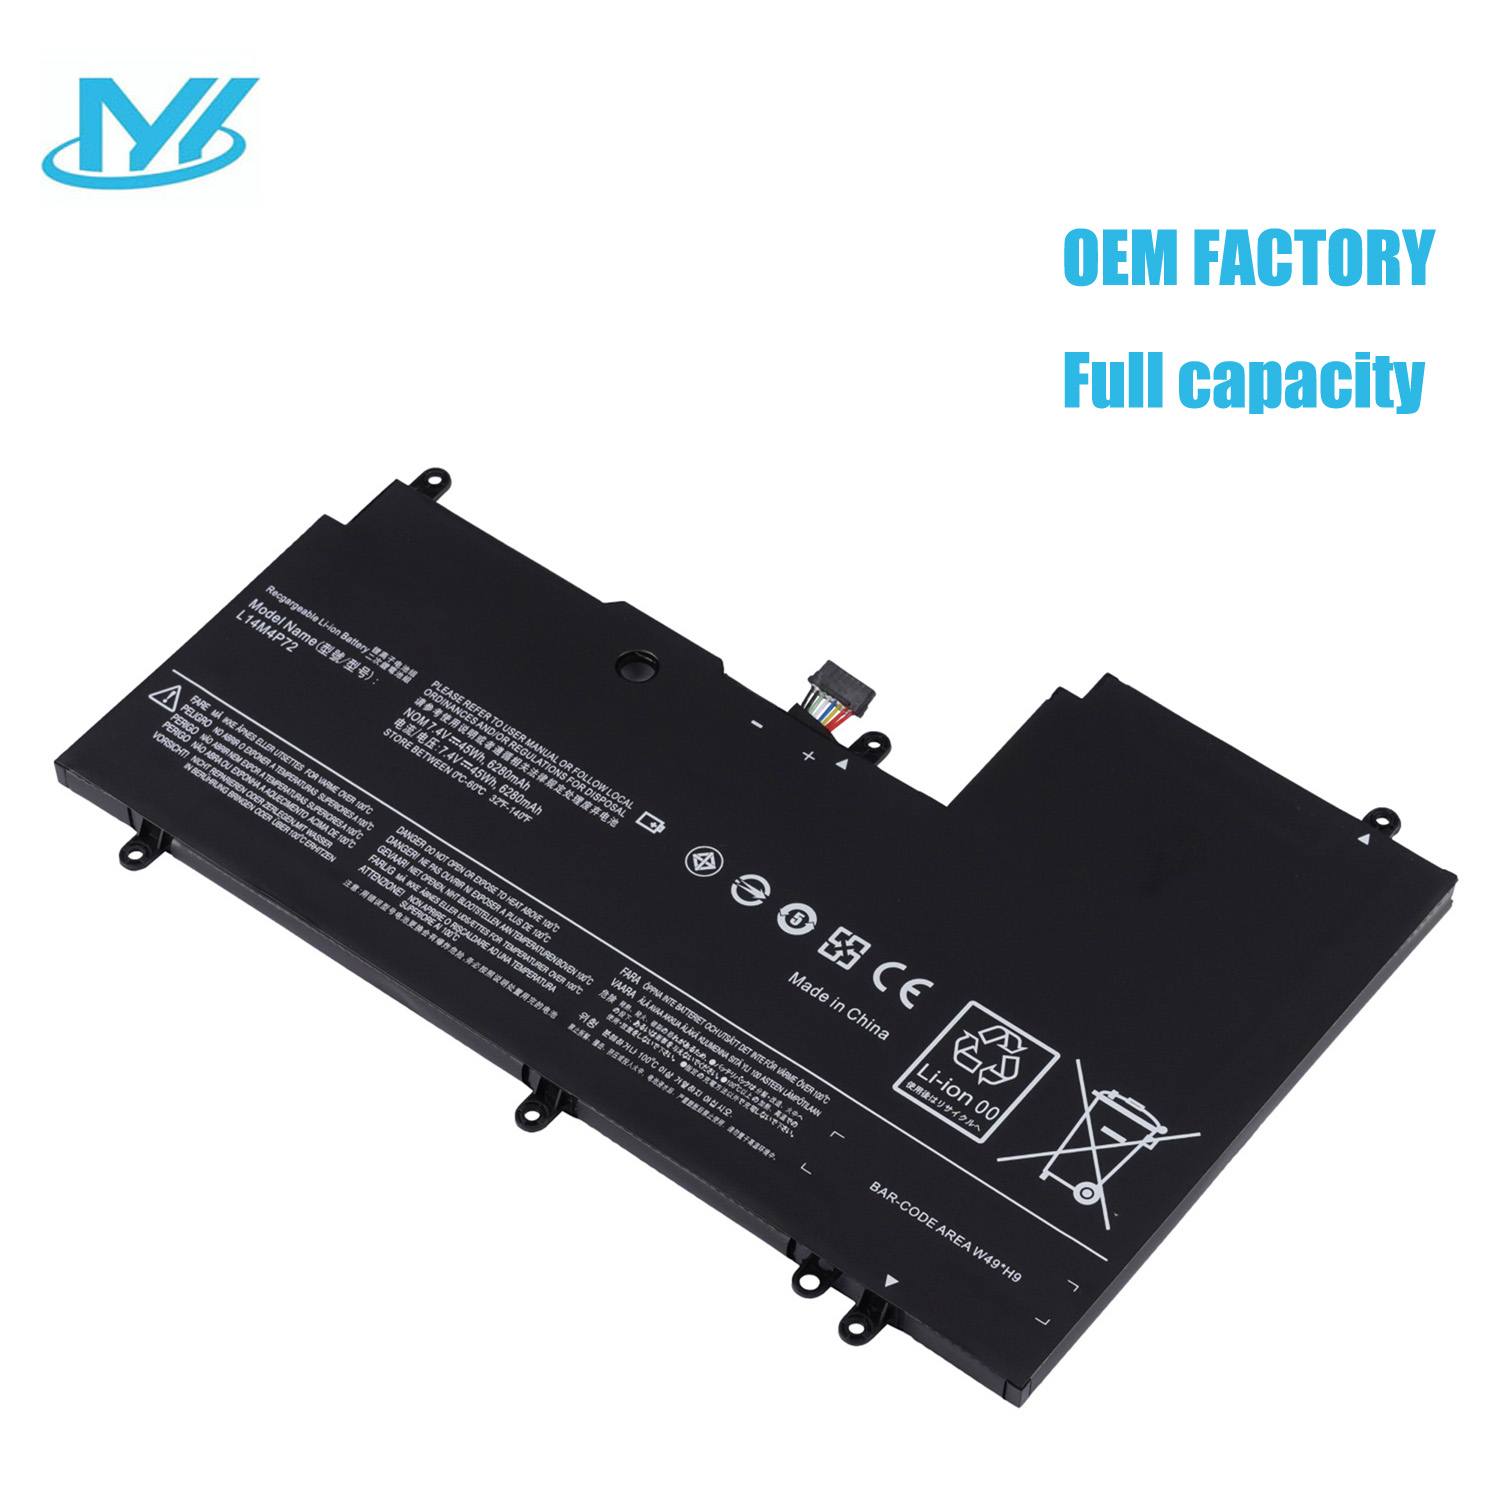 L14M4P72 rechargeable lithium ion Notebook battery Laptop battery For with Lenovo Yoga 3 14 Yoga 3 14-IFI Yoga 3 14-ISE Yoga 700-14ISK Yoga 700-14ISE Yoga 700-14IFI